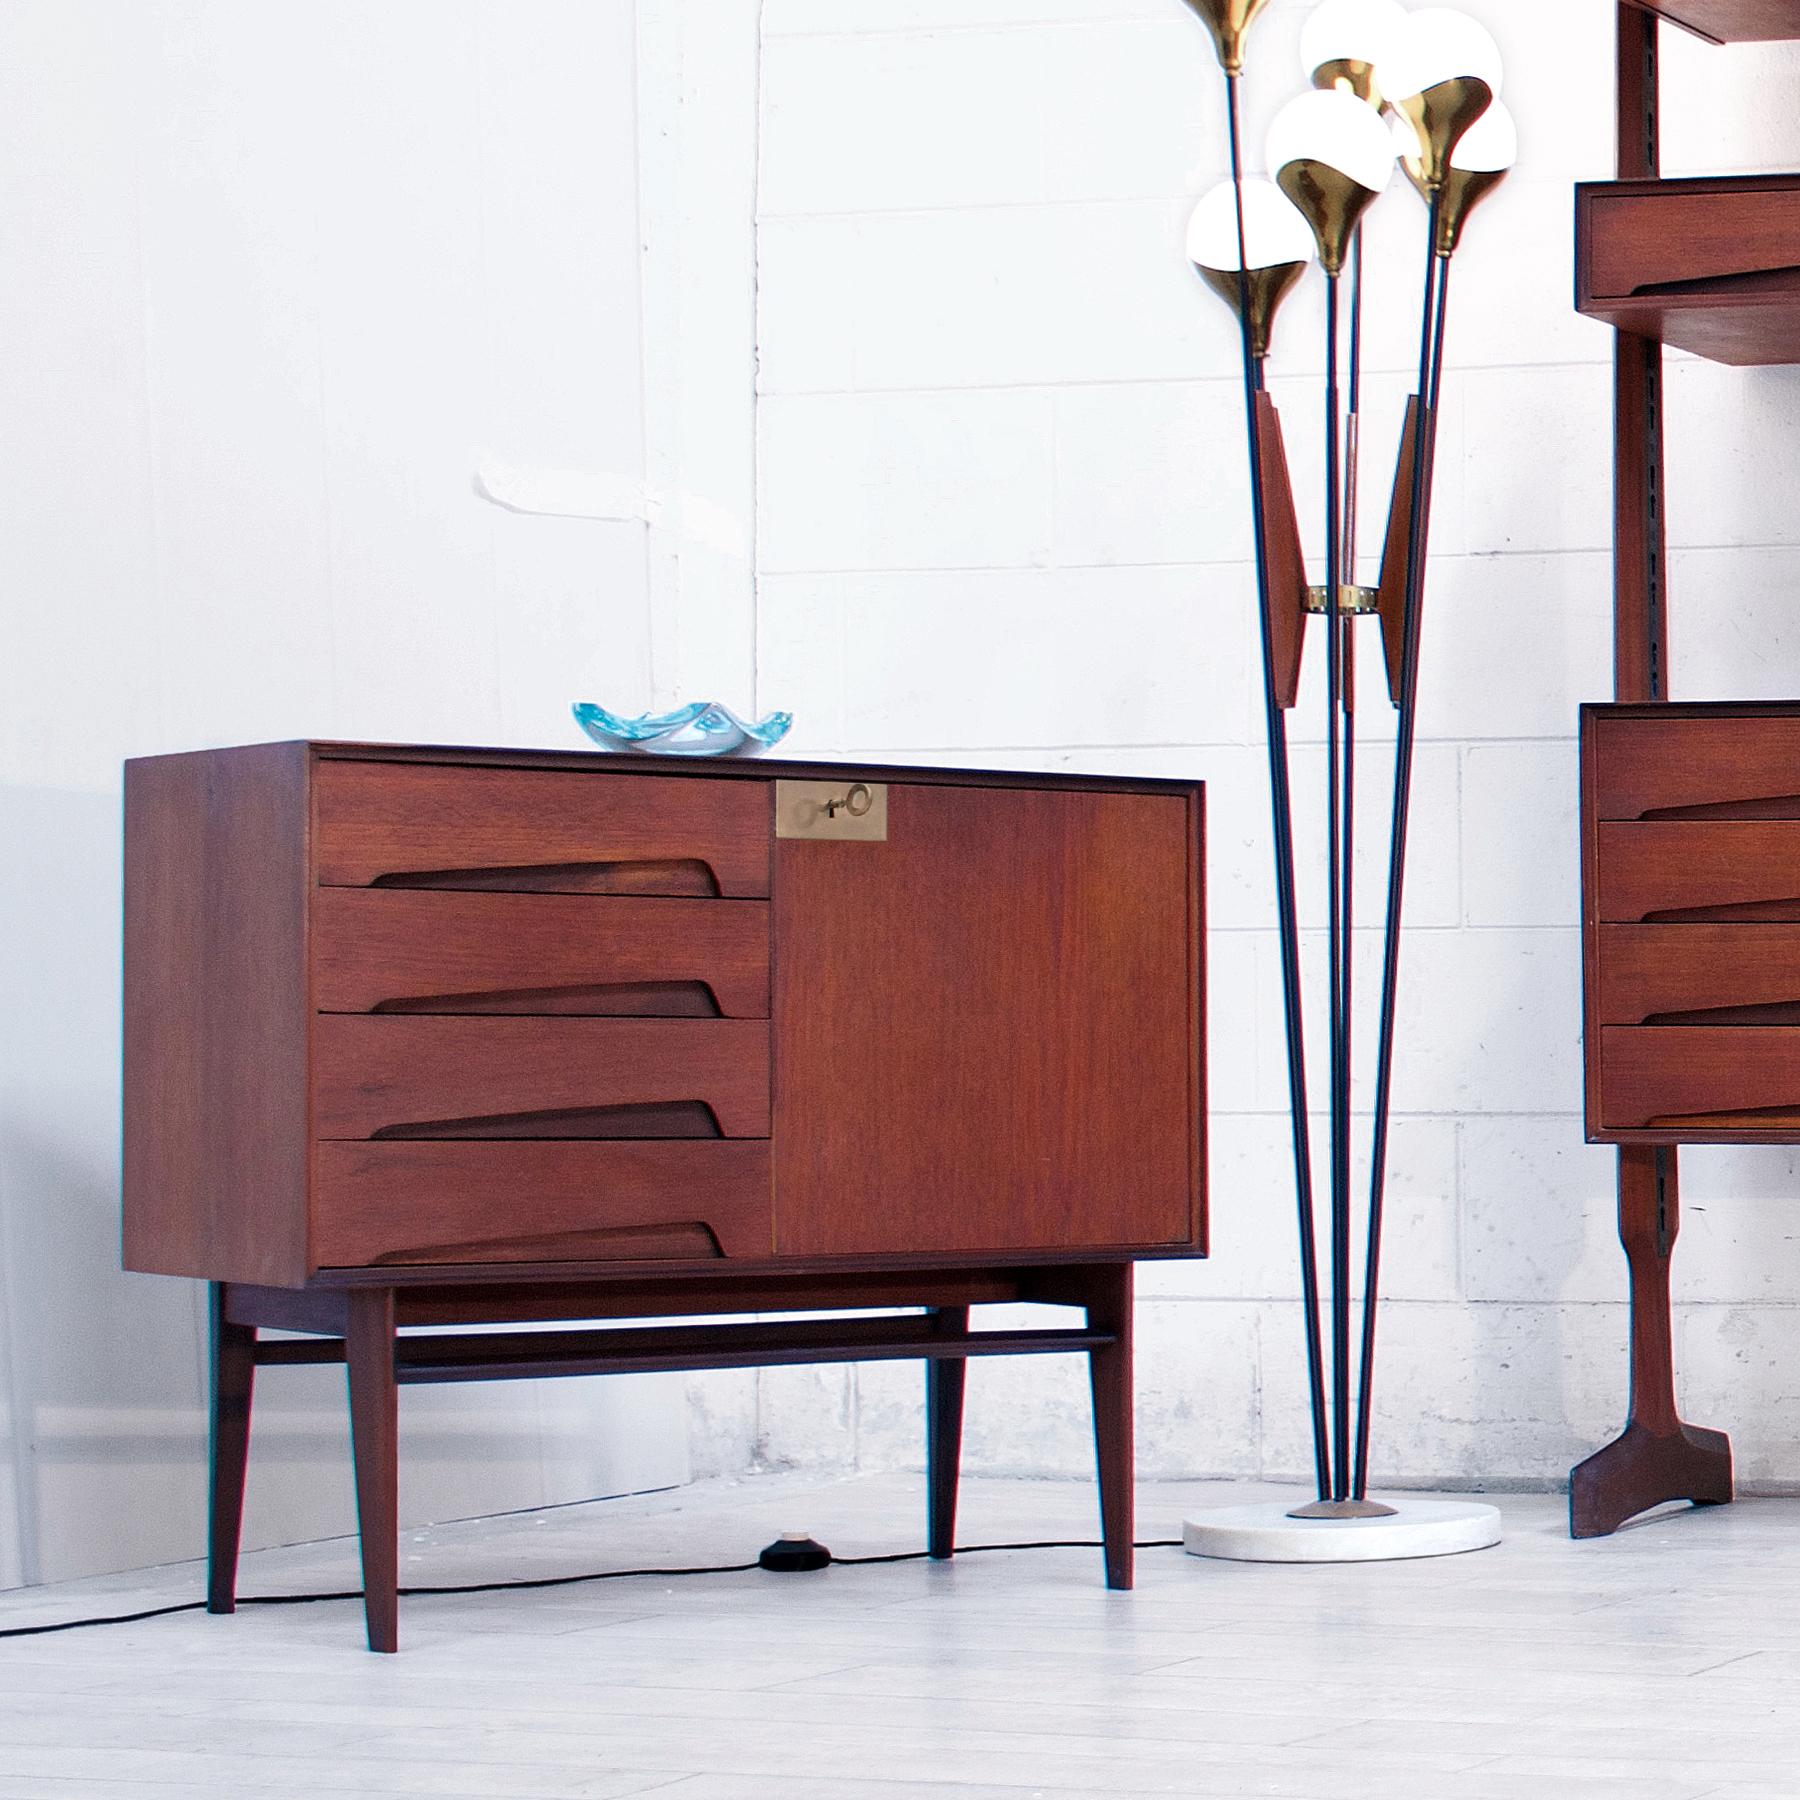 Italian Mid-Century Teak Wood Sideboard with Drawers by Vittorio Dassi, 1950s 4